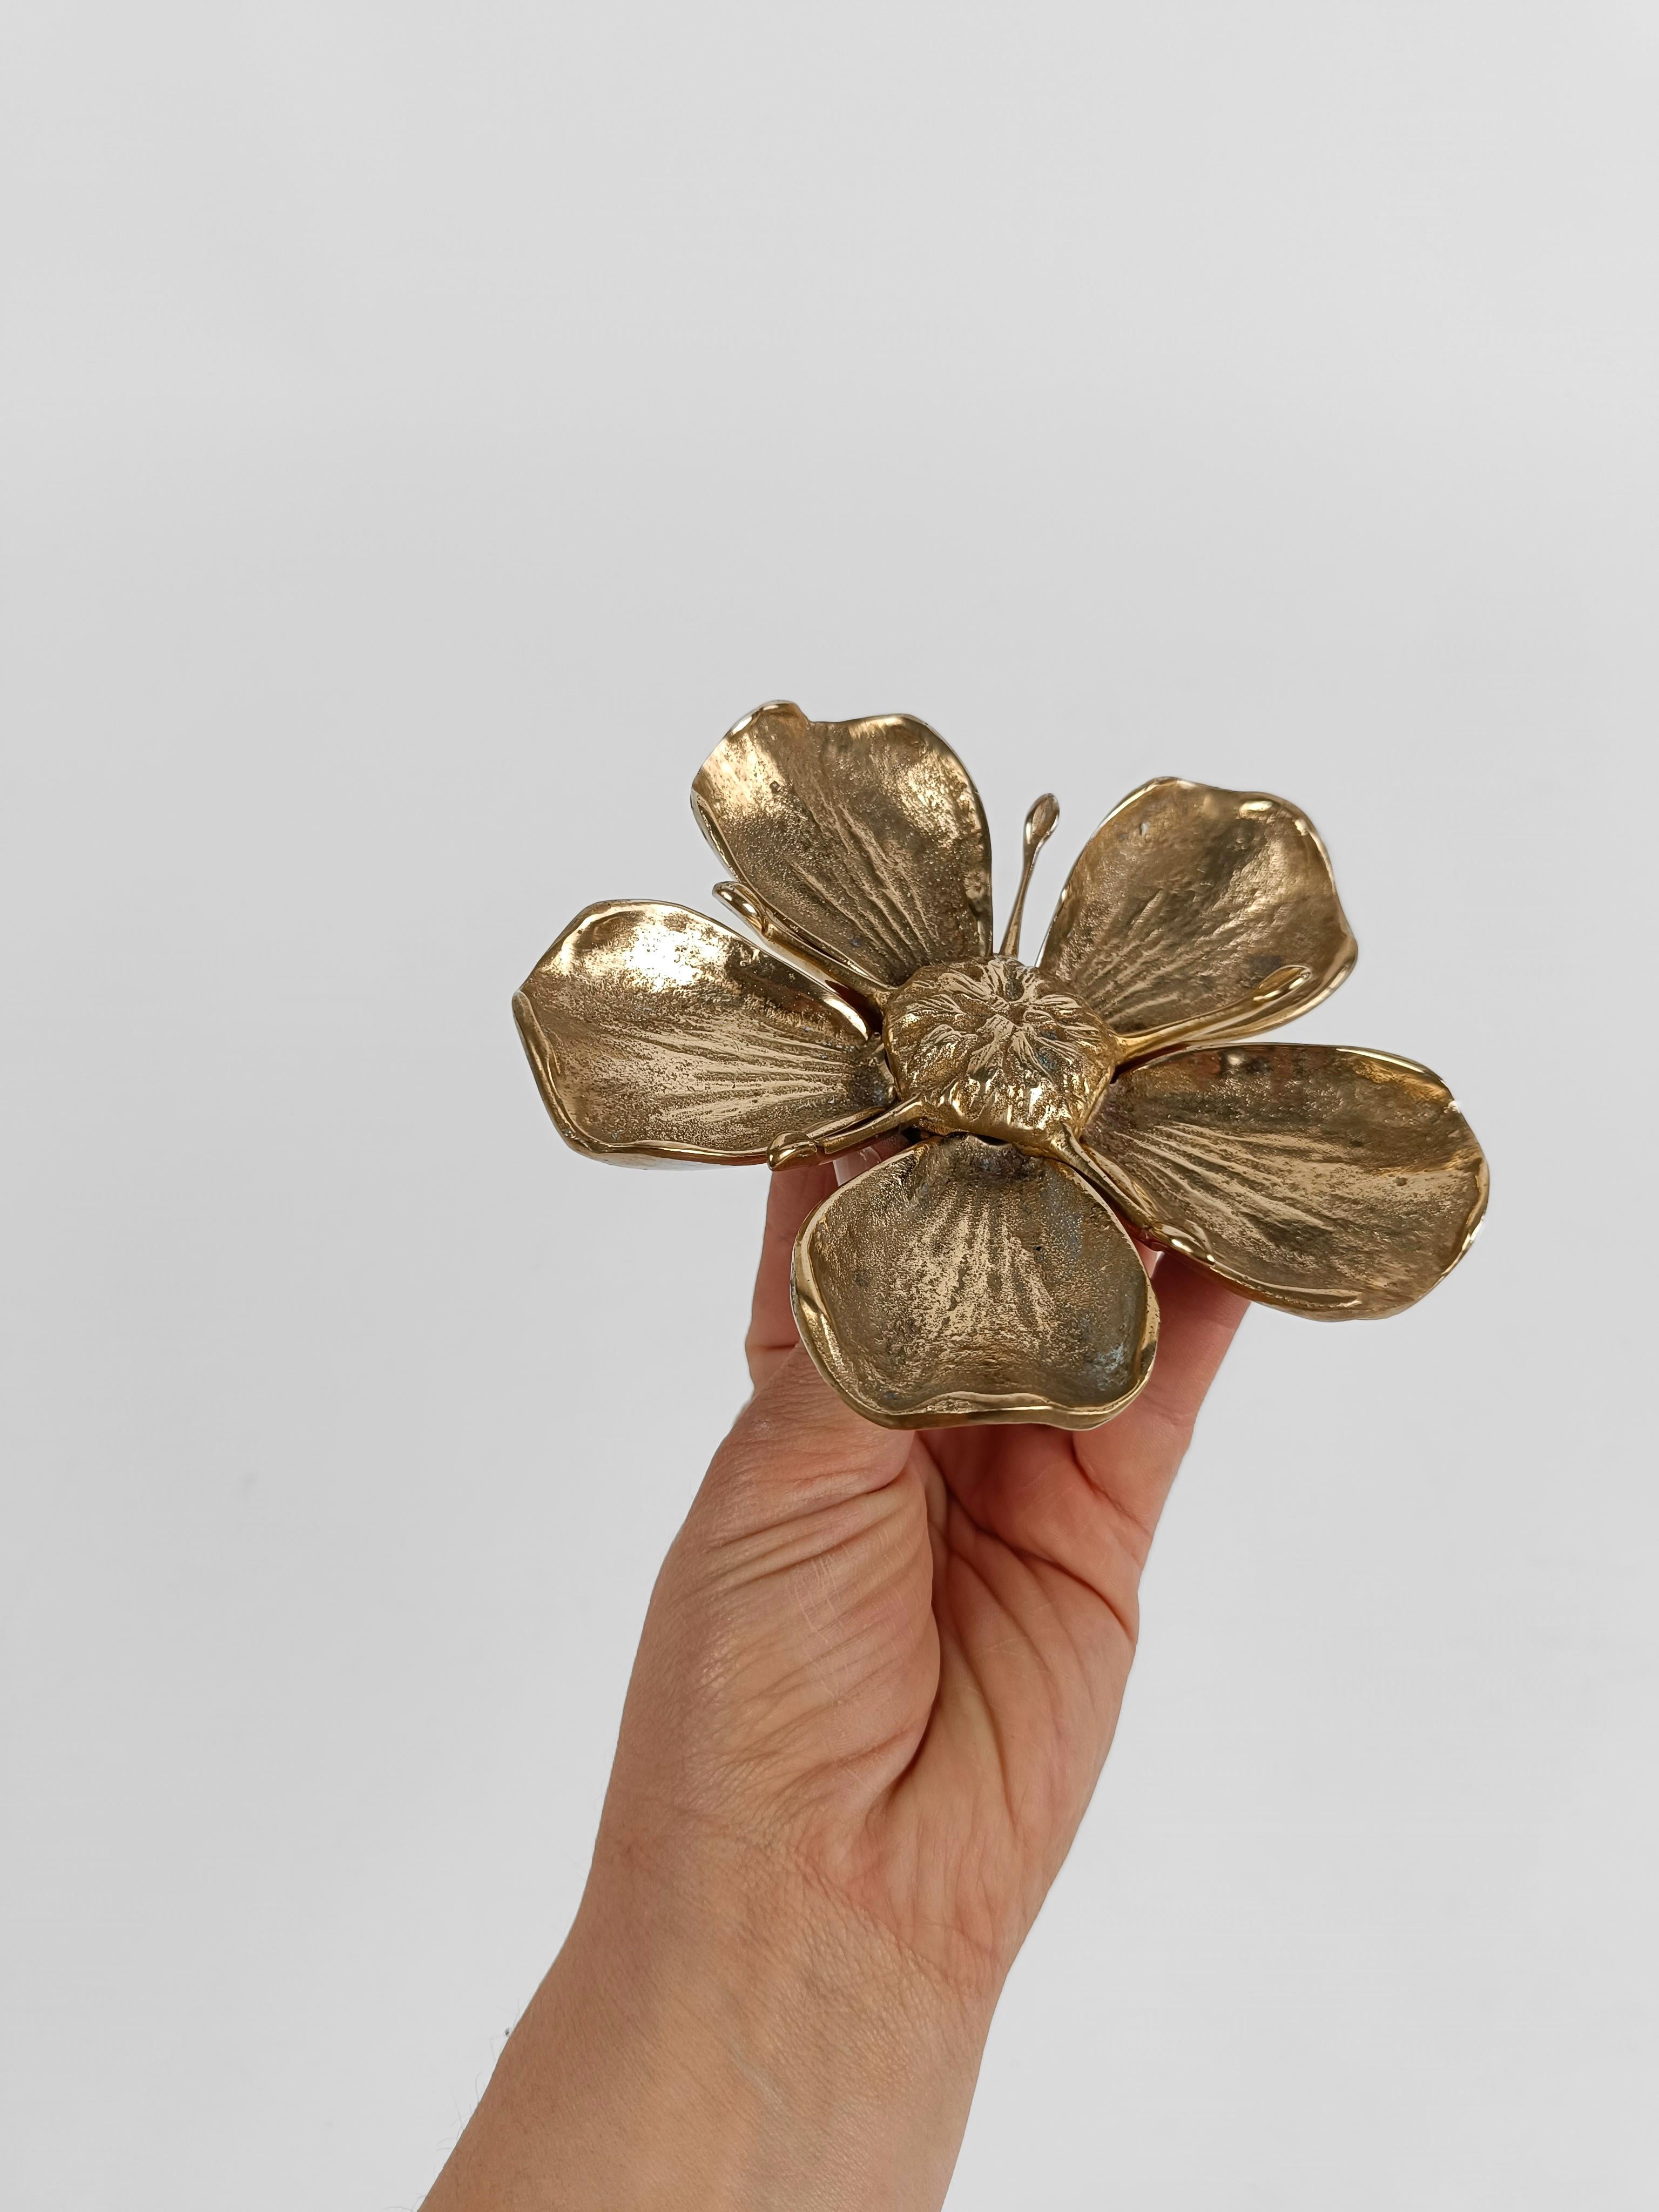 Vintage Brass Metal FLOWER ASHTRAY in the style of Gucci with Removable Petals 1